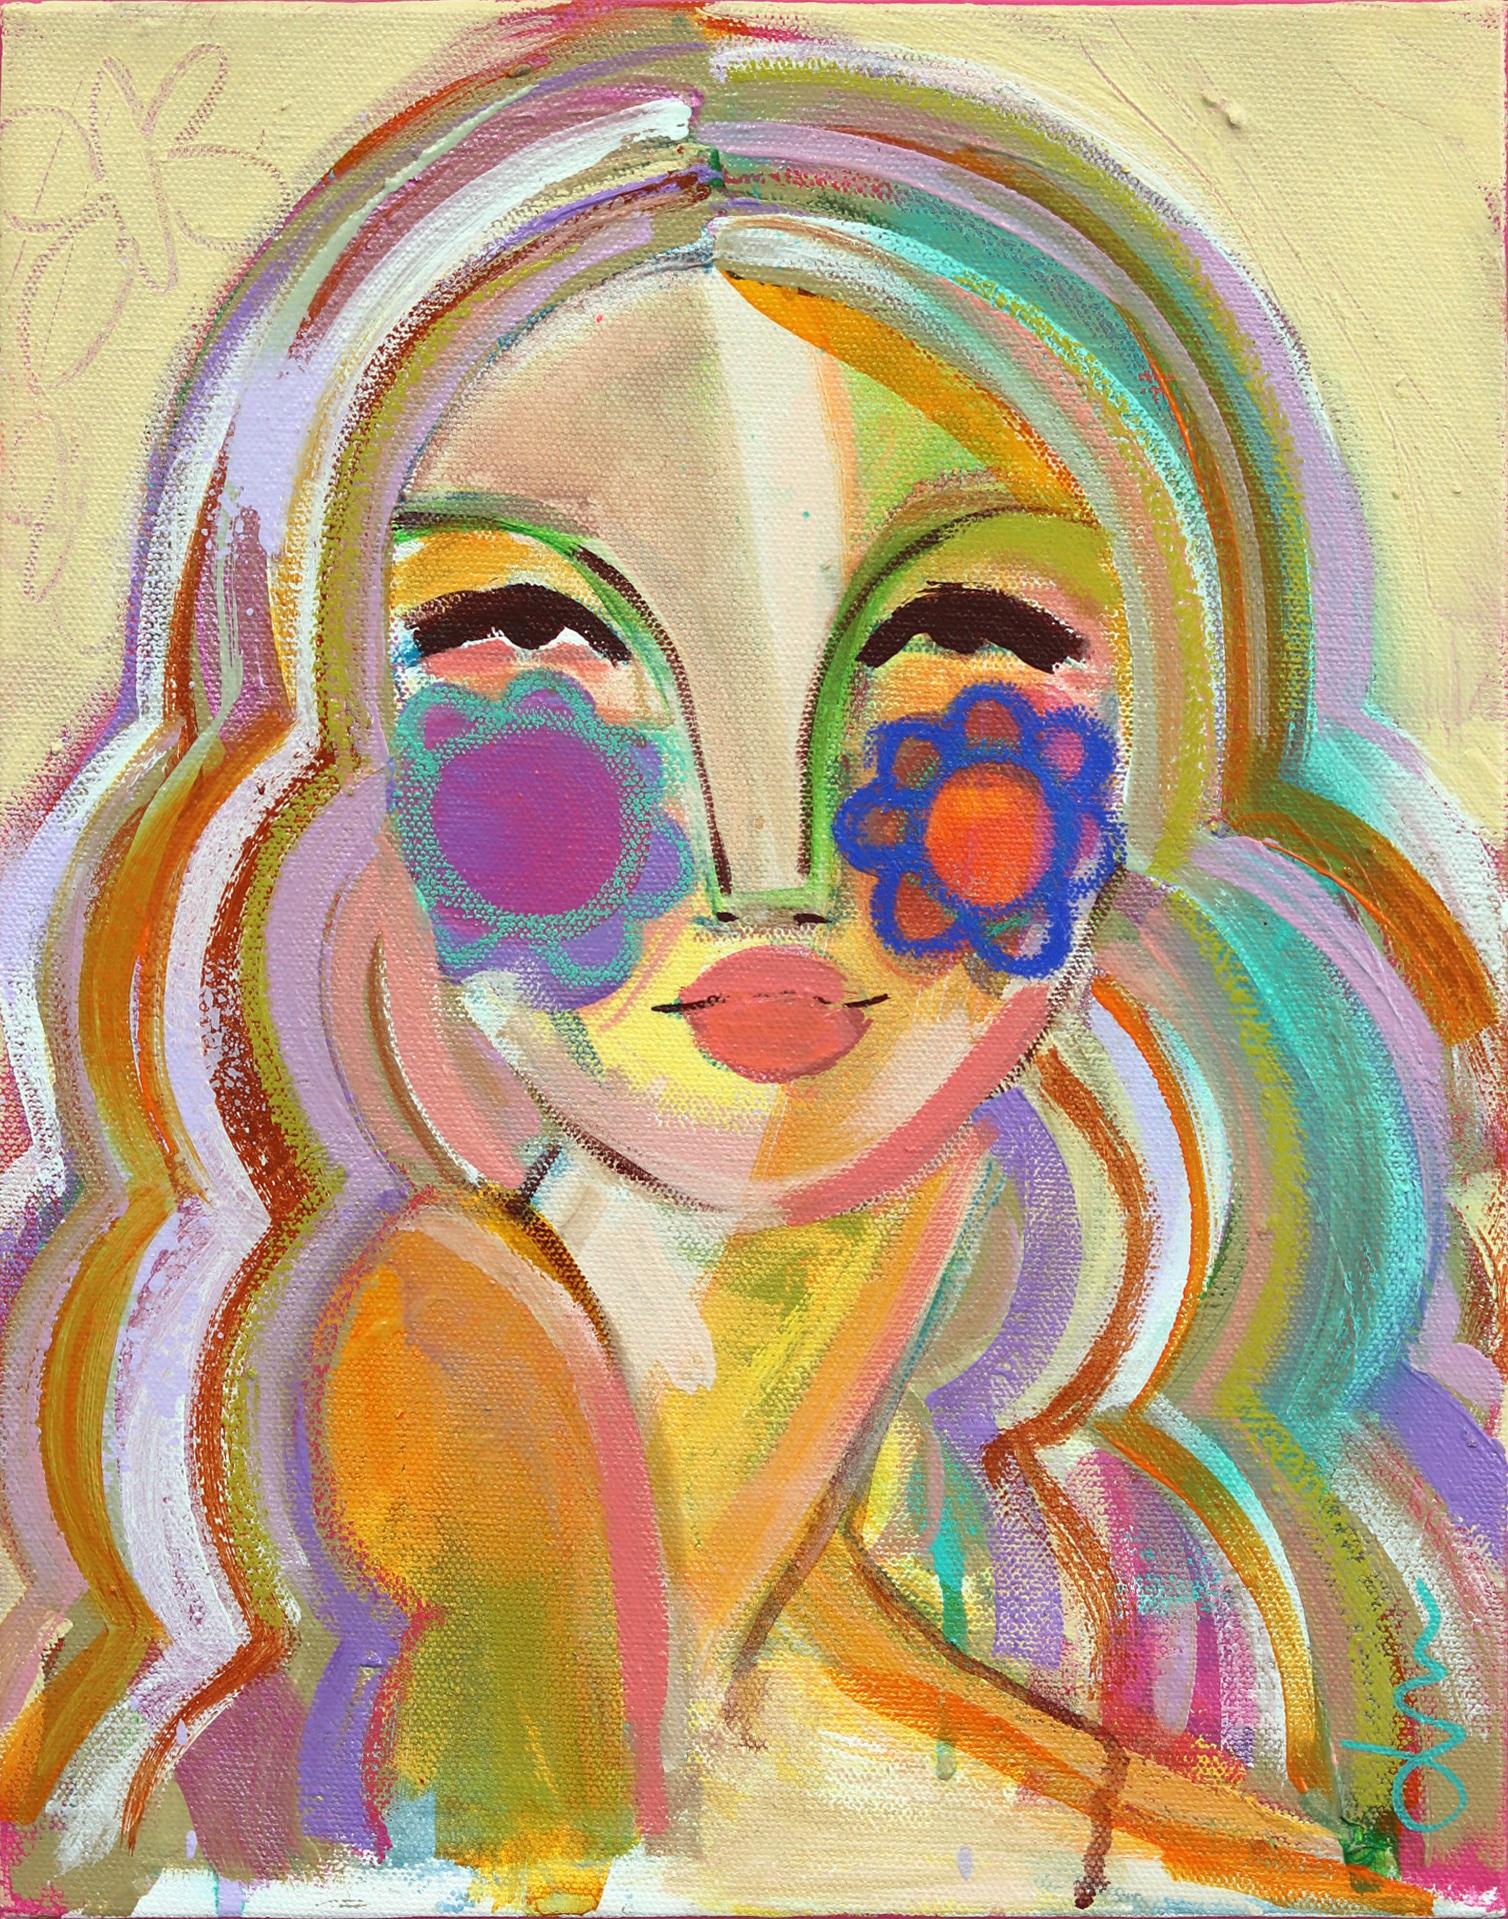 Summer Stunner - Colorful Abstract Figurative Portrait Original Painting